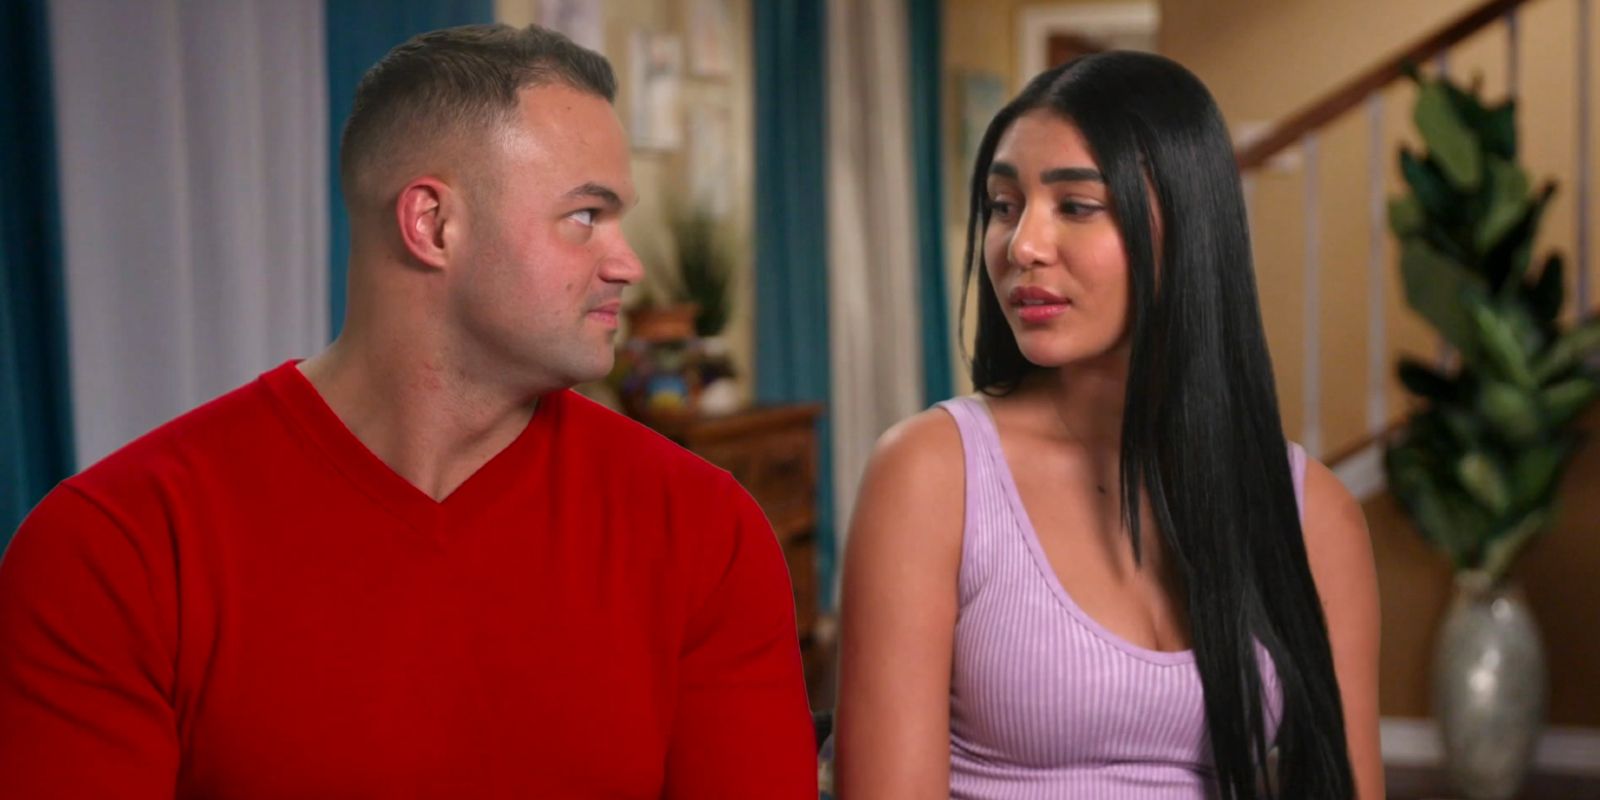 Patrick and Thaís looking at each other while talking to the camera in 90 Day Fiancé.